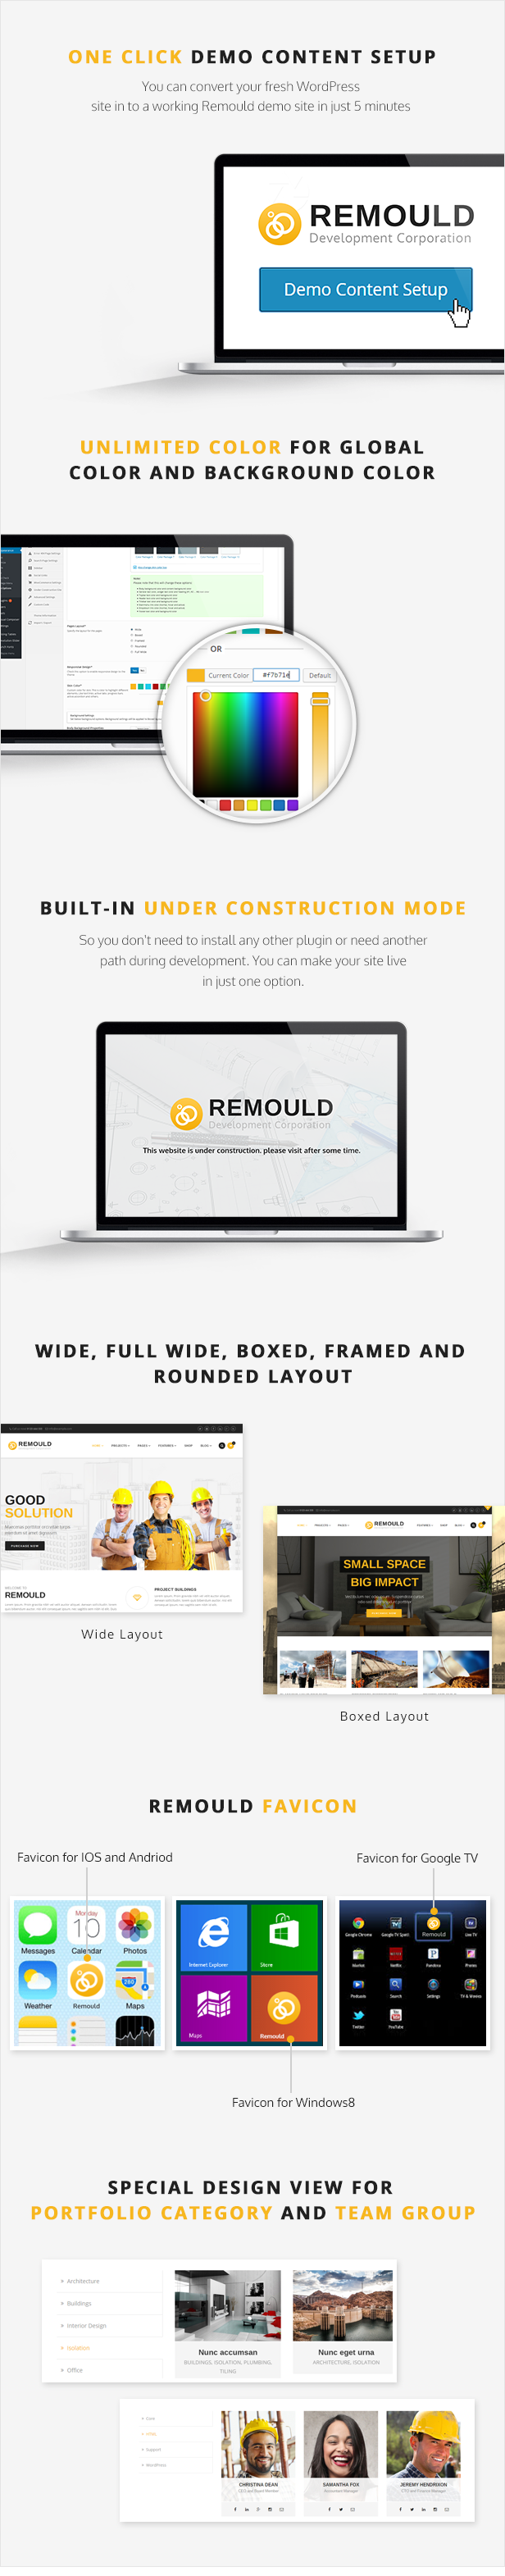 Remould WordPress Theme - One Click demo content setup and other features